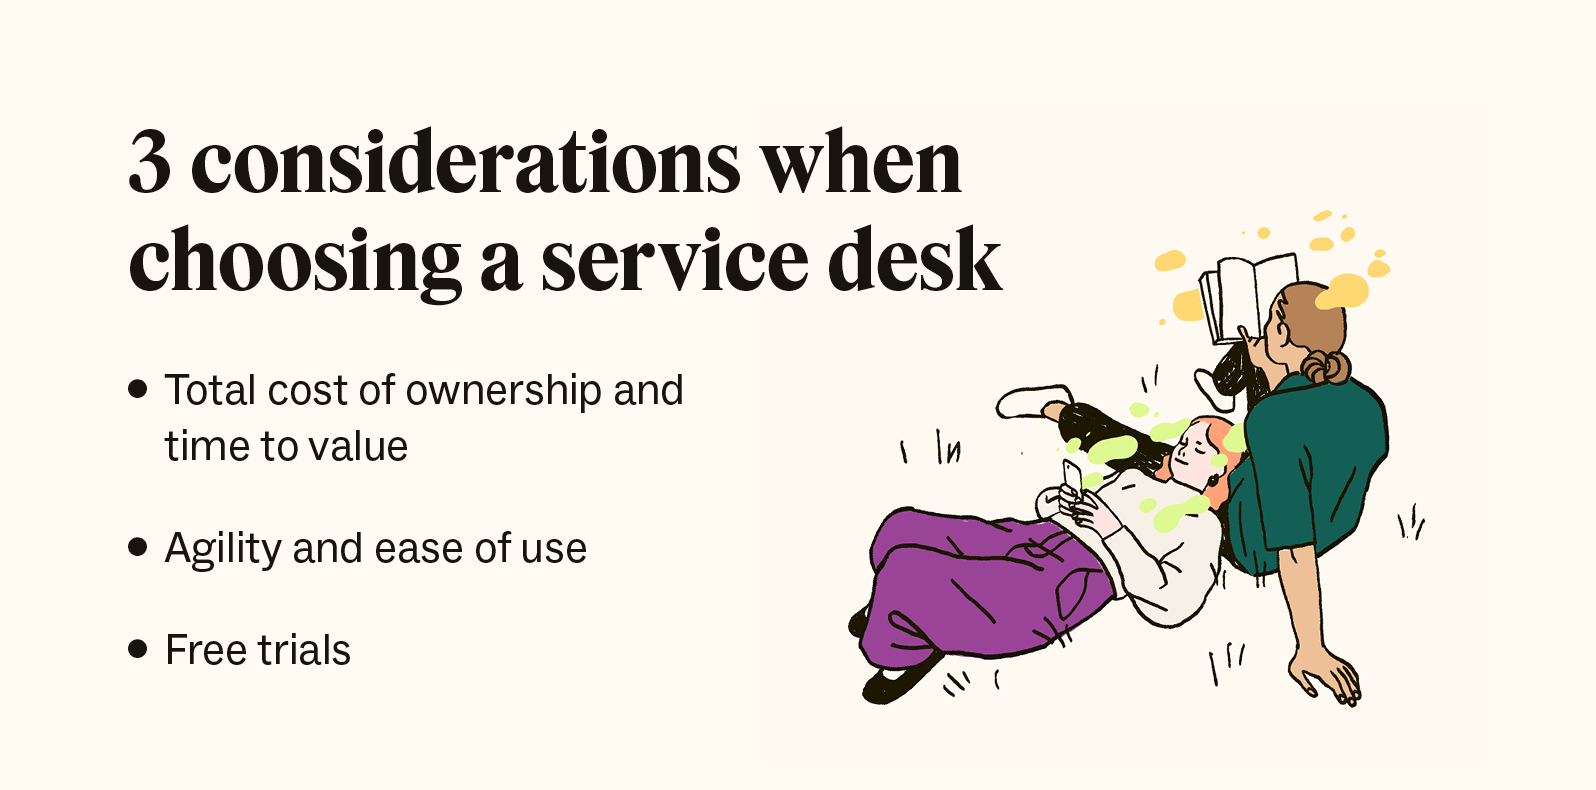 The image depicts a list of three things to consider when choosing a service desk.